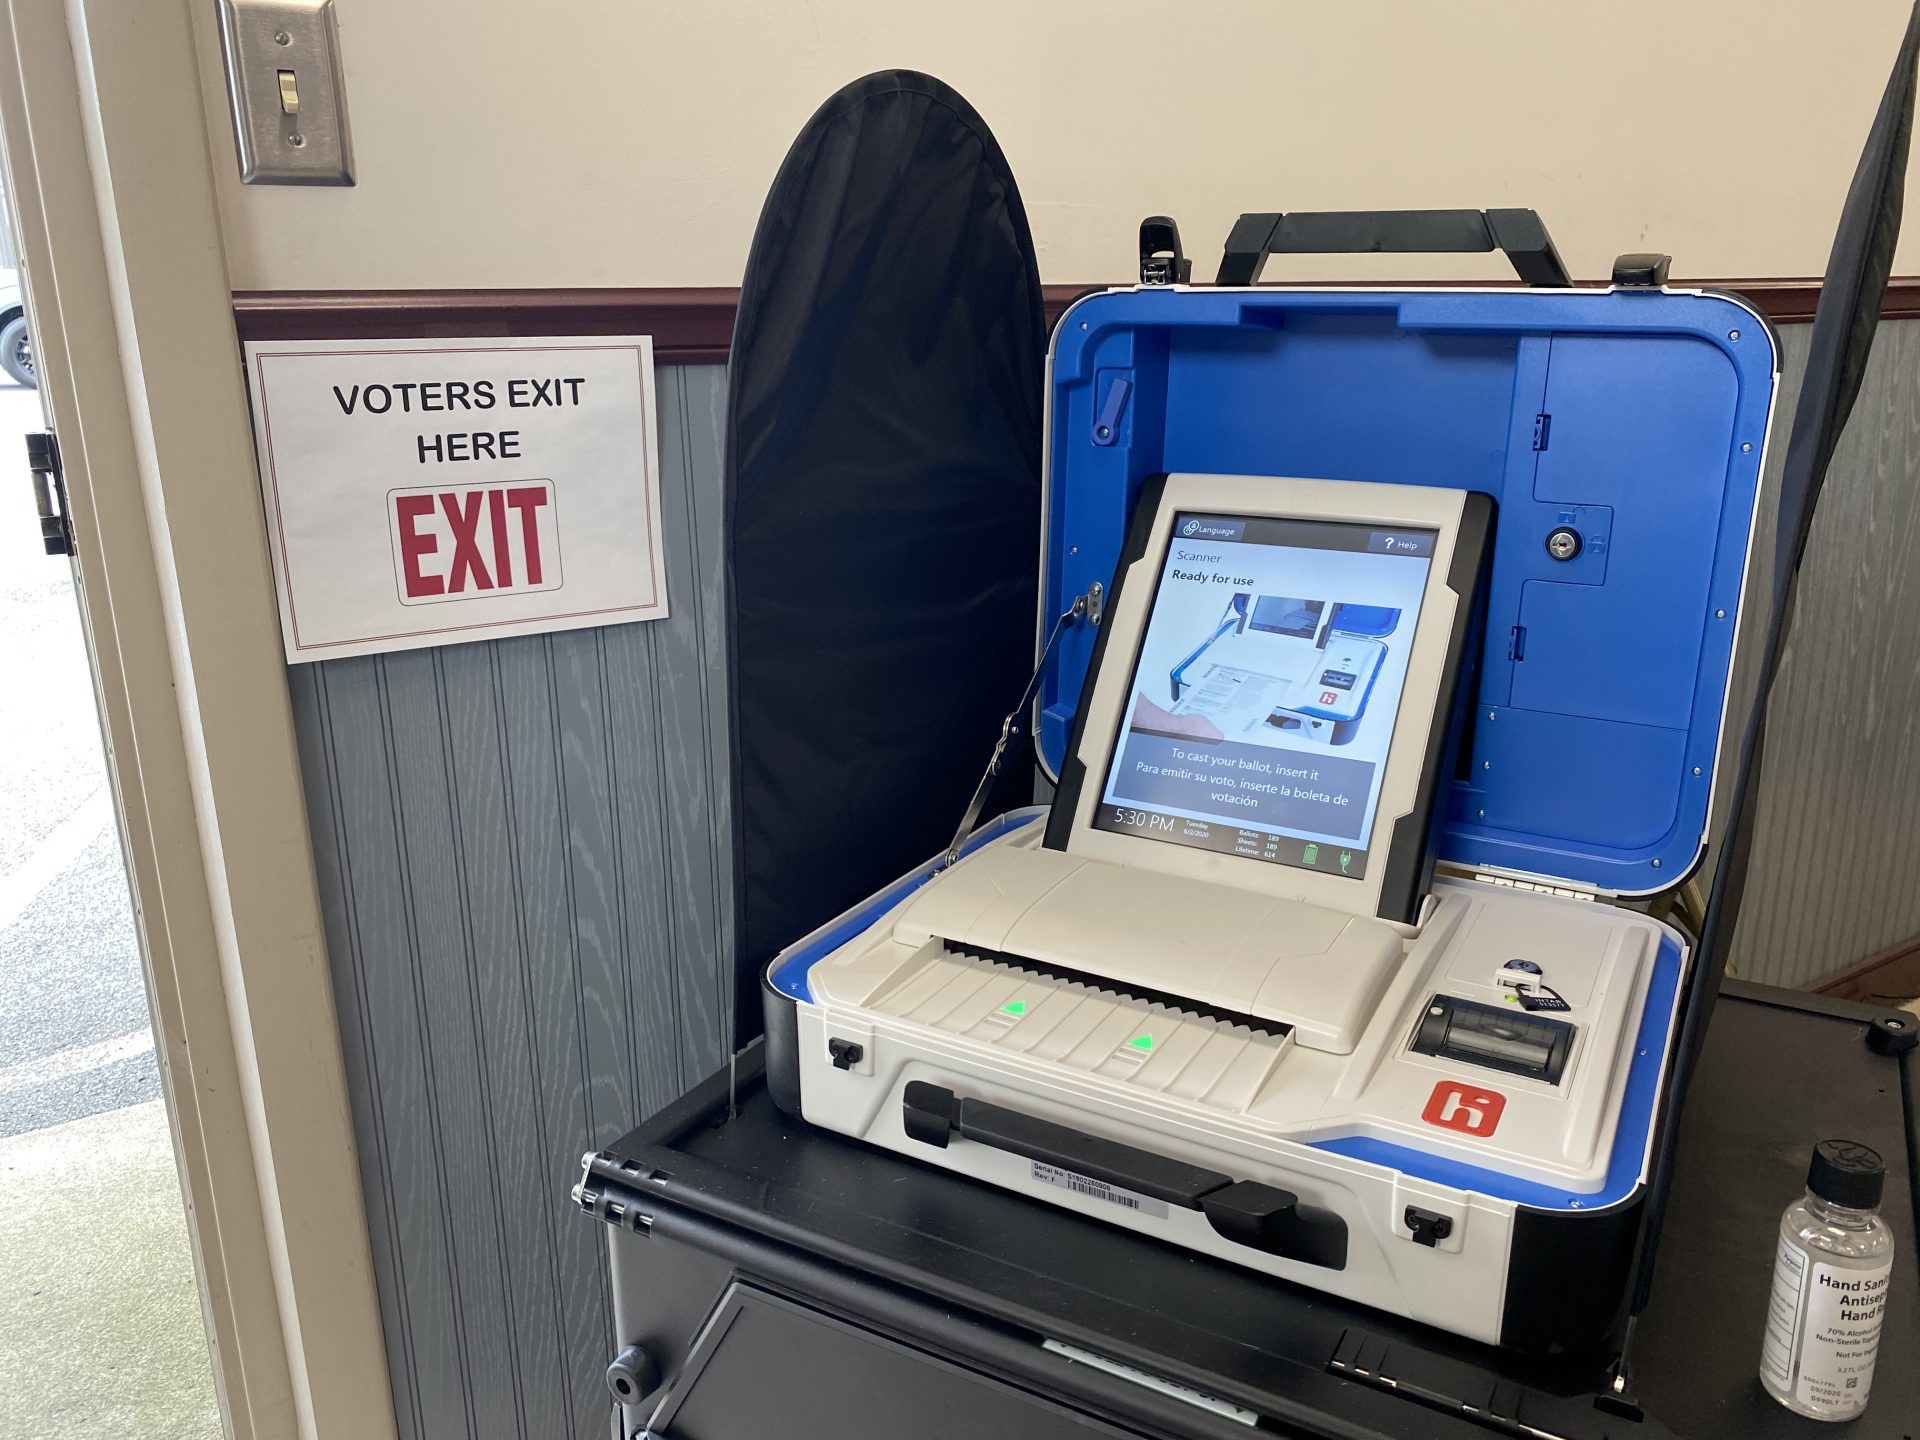 The voting machines at the Mount Joy Borough Municipal Office were among those having issues on June 2, 2020.